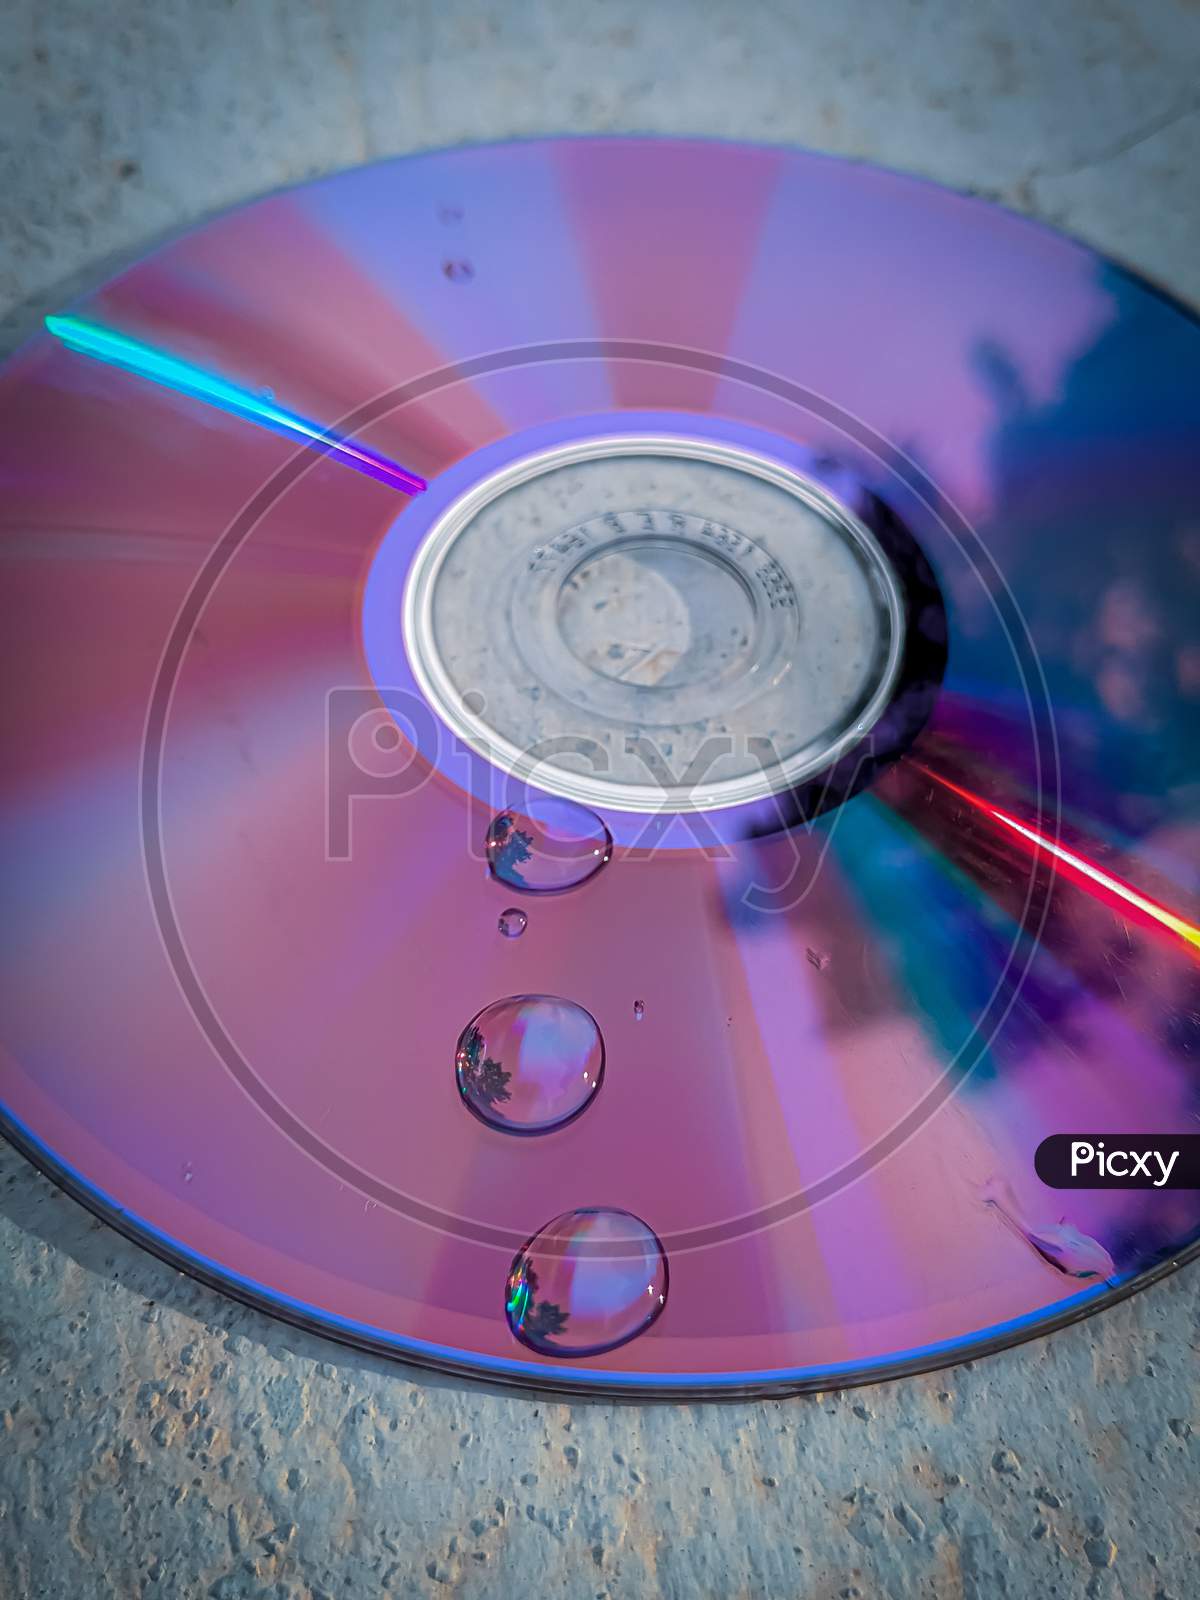 Water drops on CD